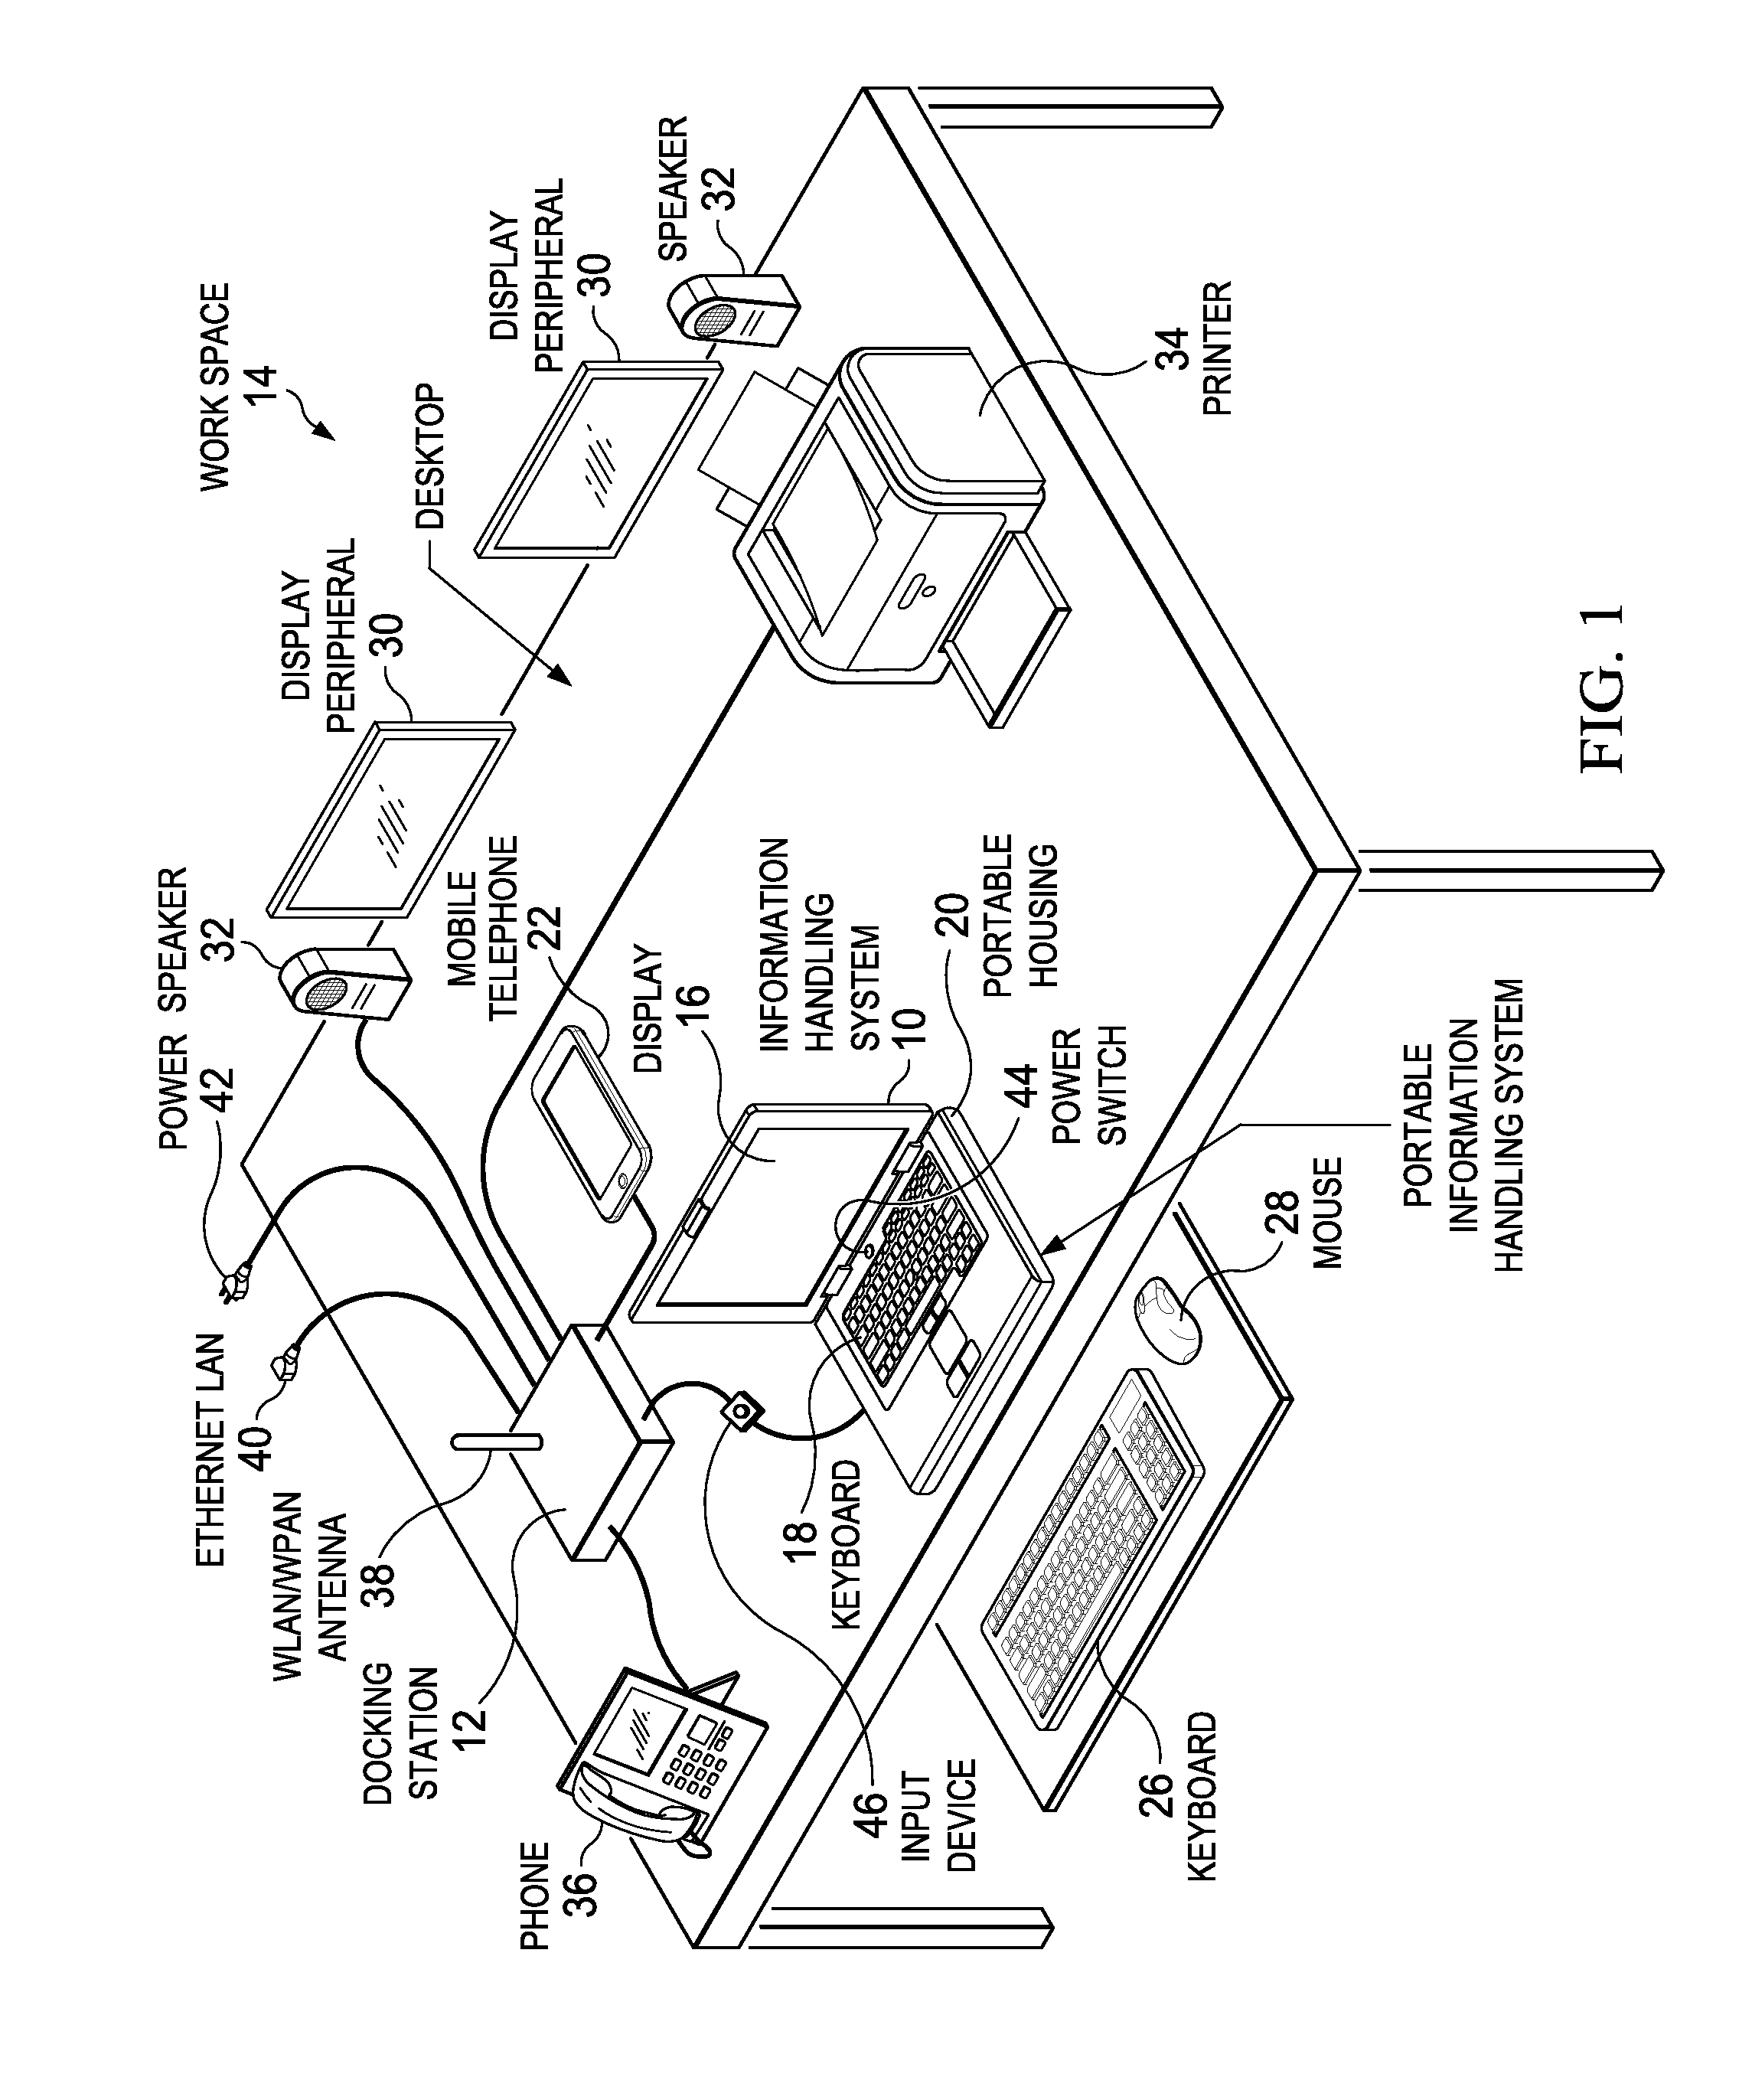 Information Handling System Docking with Cable Based Power and Video Management